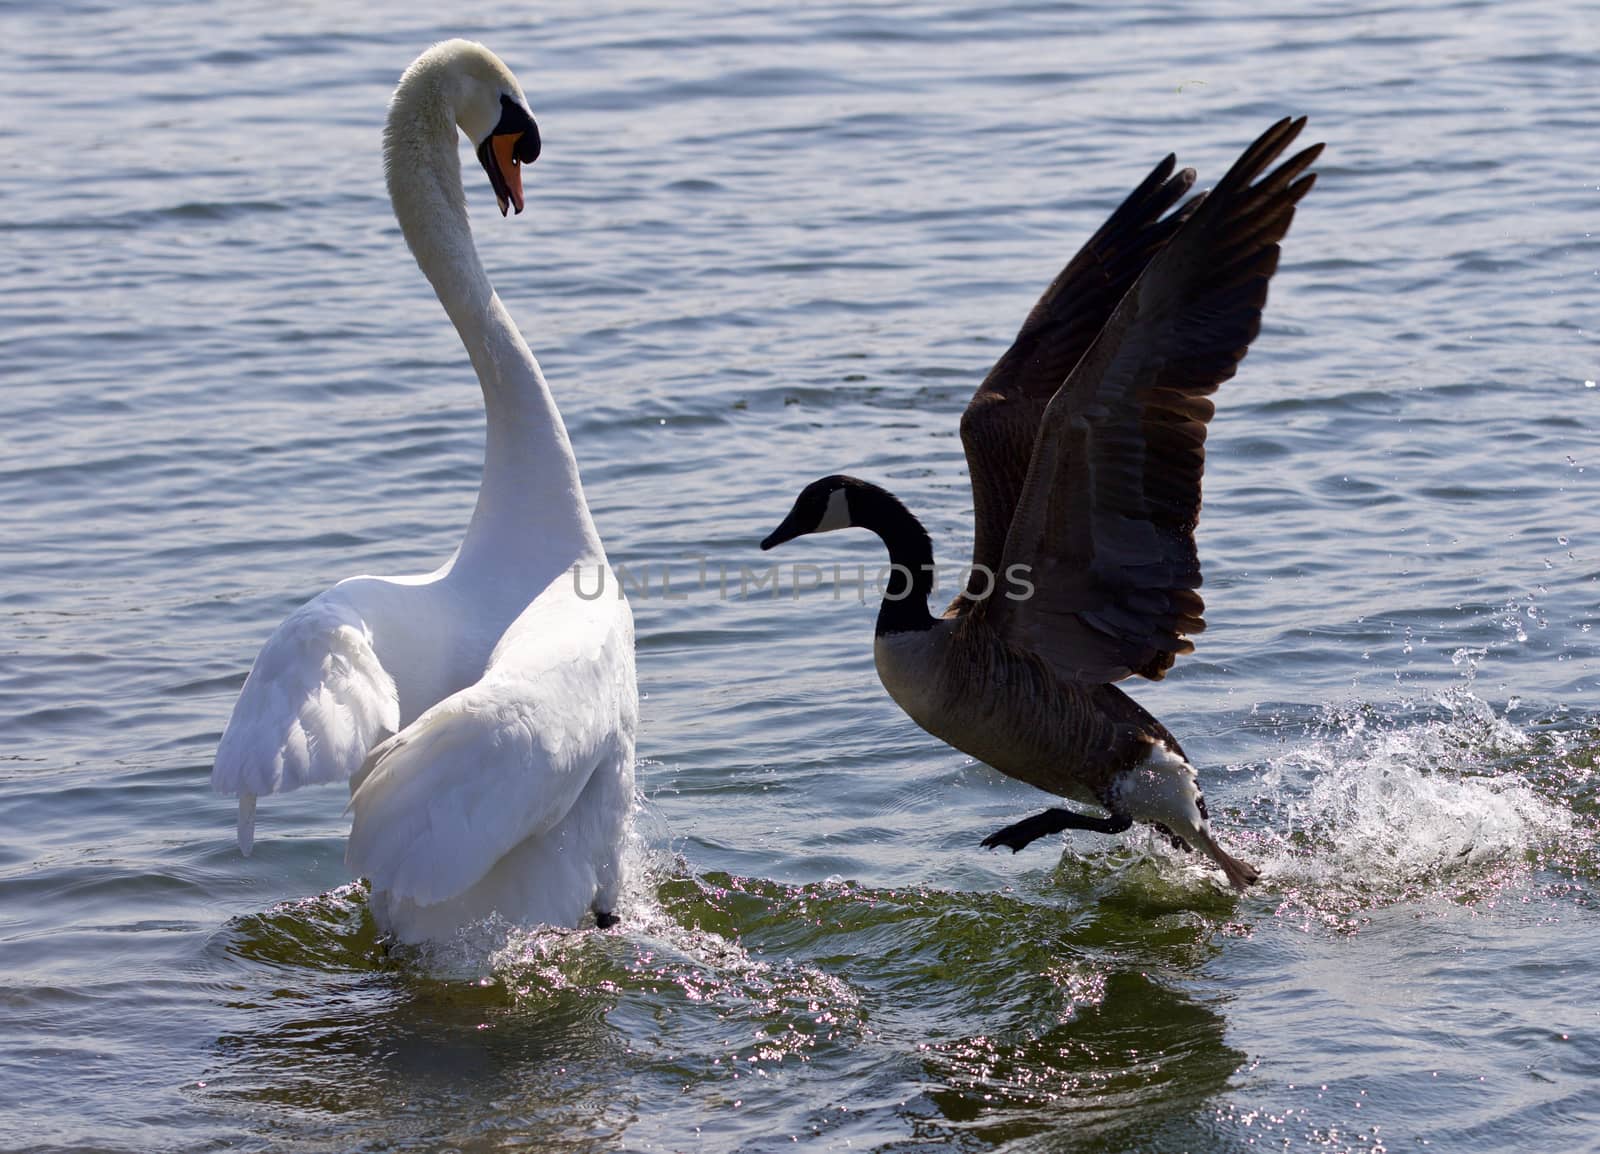 Amazing photo of the epic fight between the Canada goose and the swan by teo